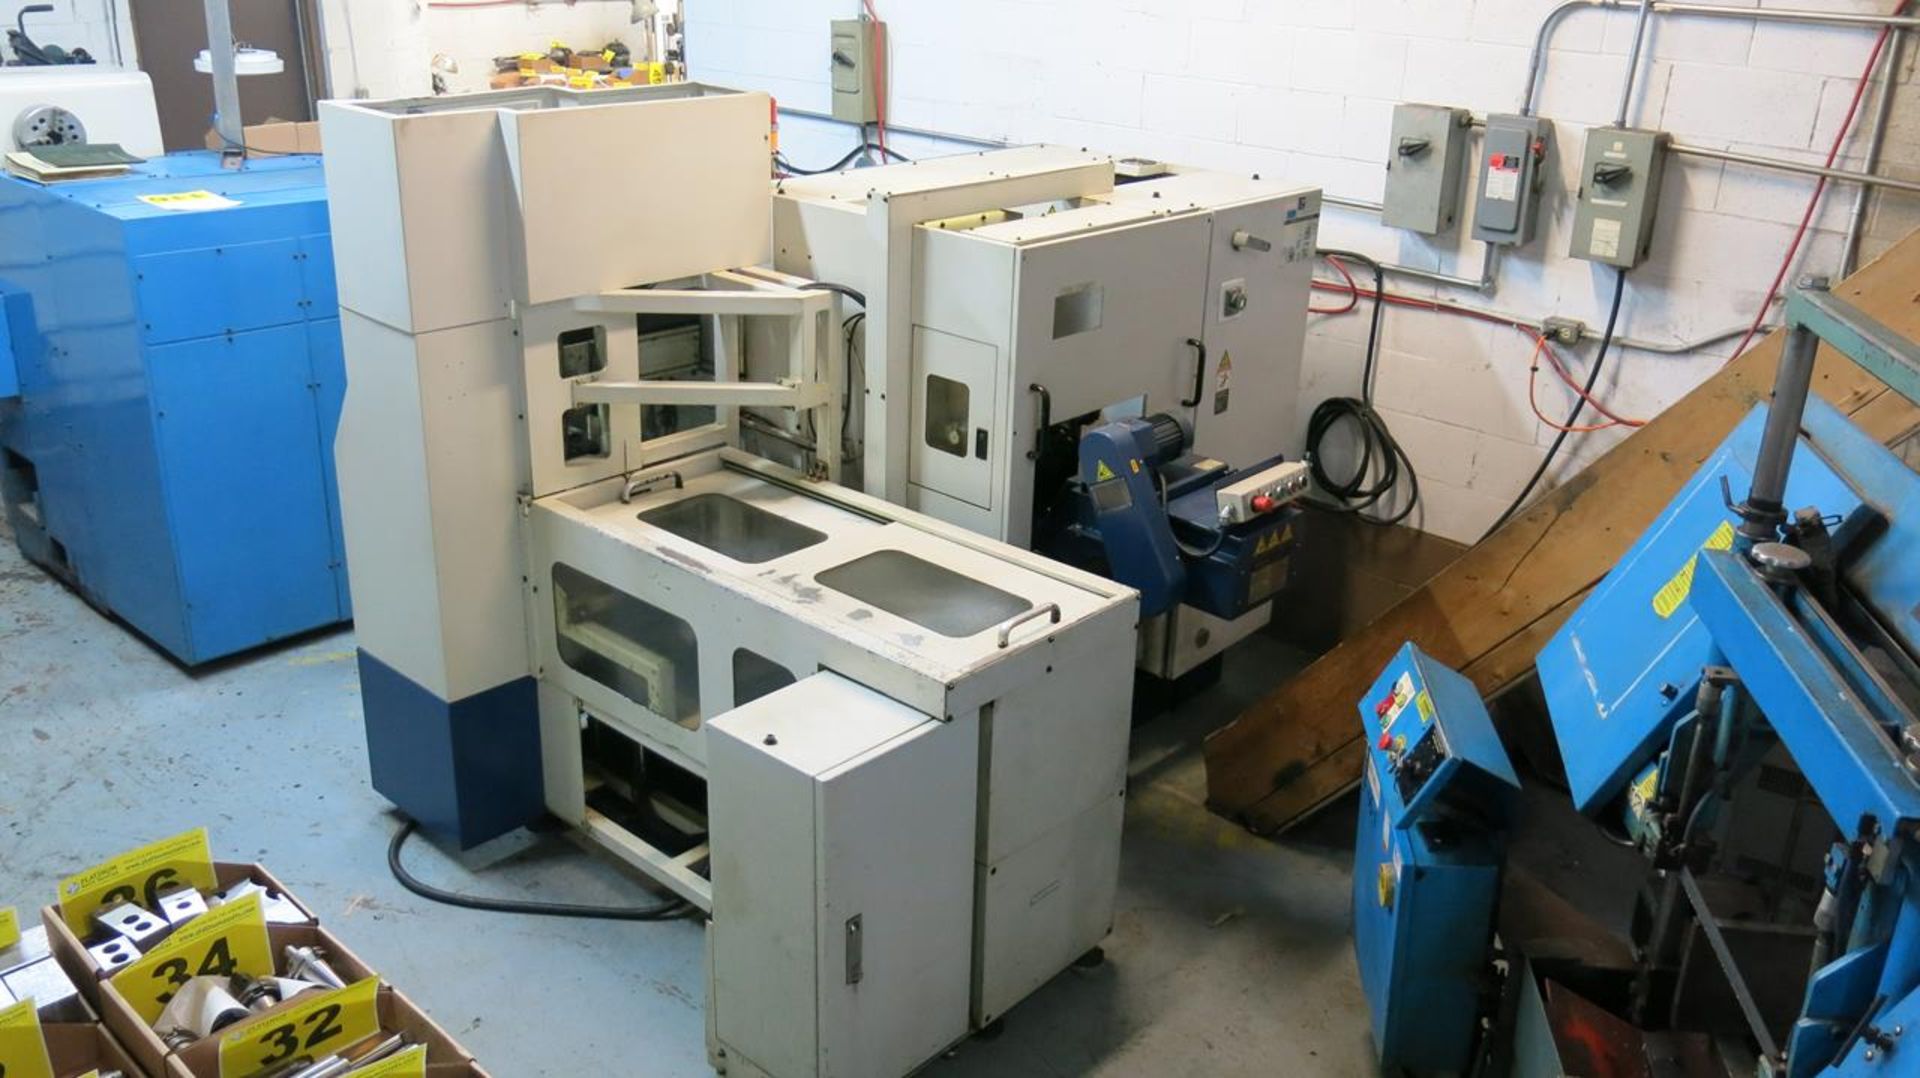 2012, TONGTAI MACHINE CO., HS-22, CNC PRECISION LATHE, 15 HP SPINDLE, 6000 RPM SPINDLE, 6" DIA 3 JAW - Image 3 of 9